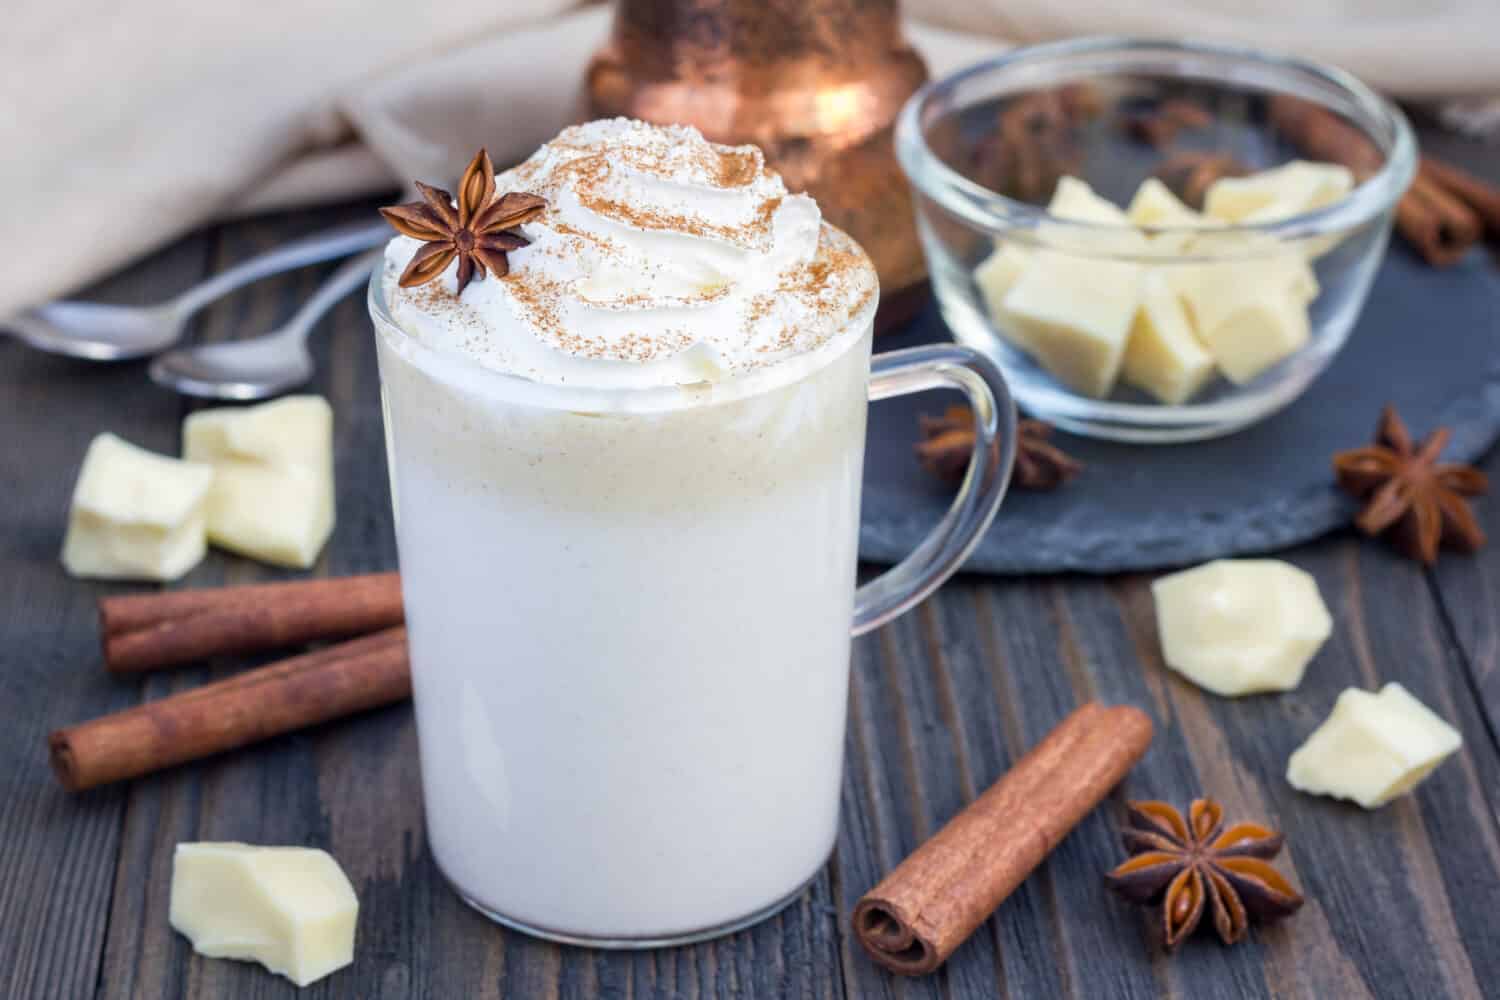 Hot white chocolate, decorated with whipped cream and cinnamon.